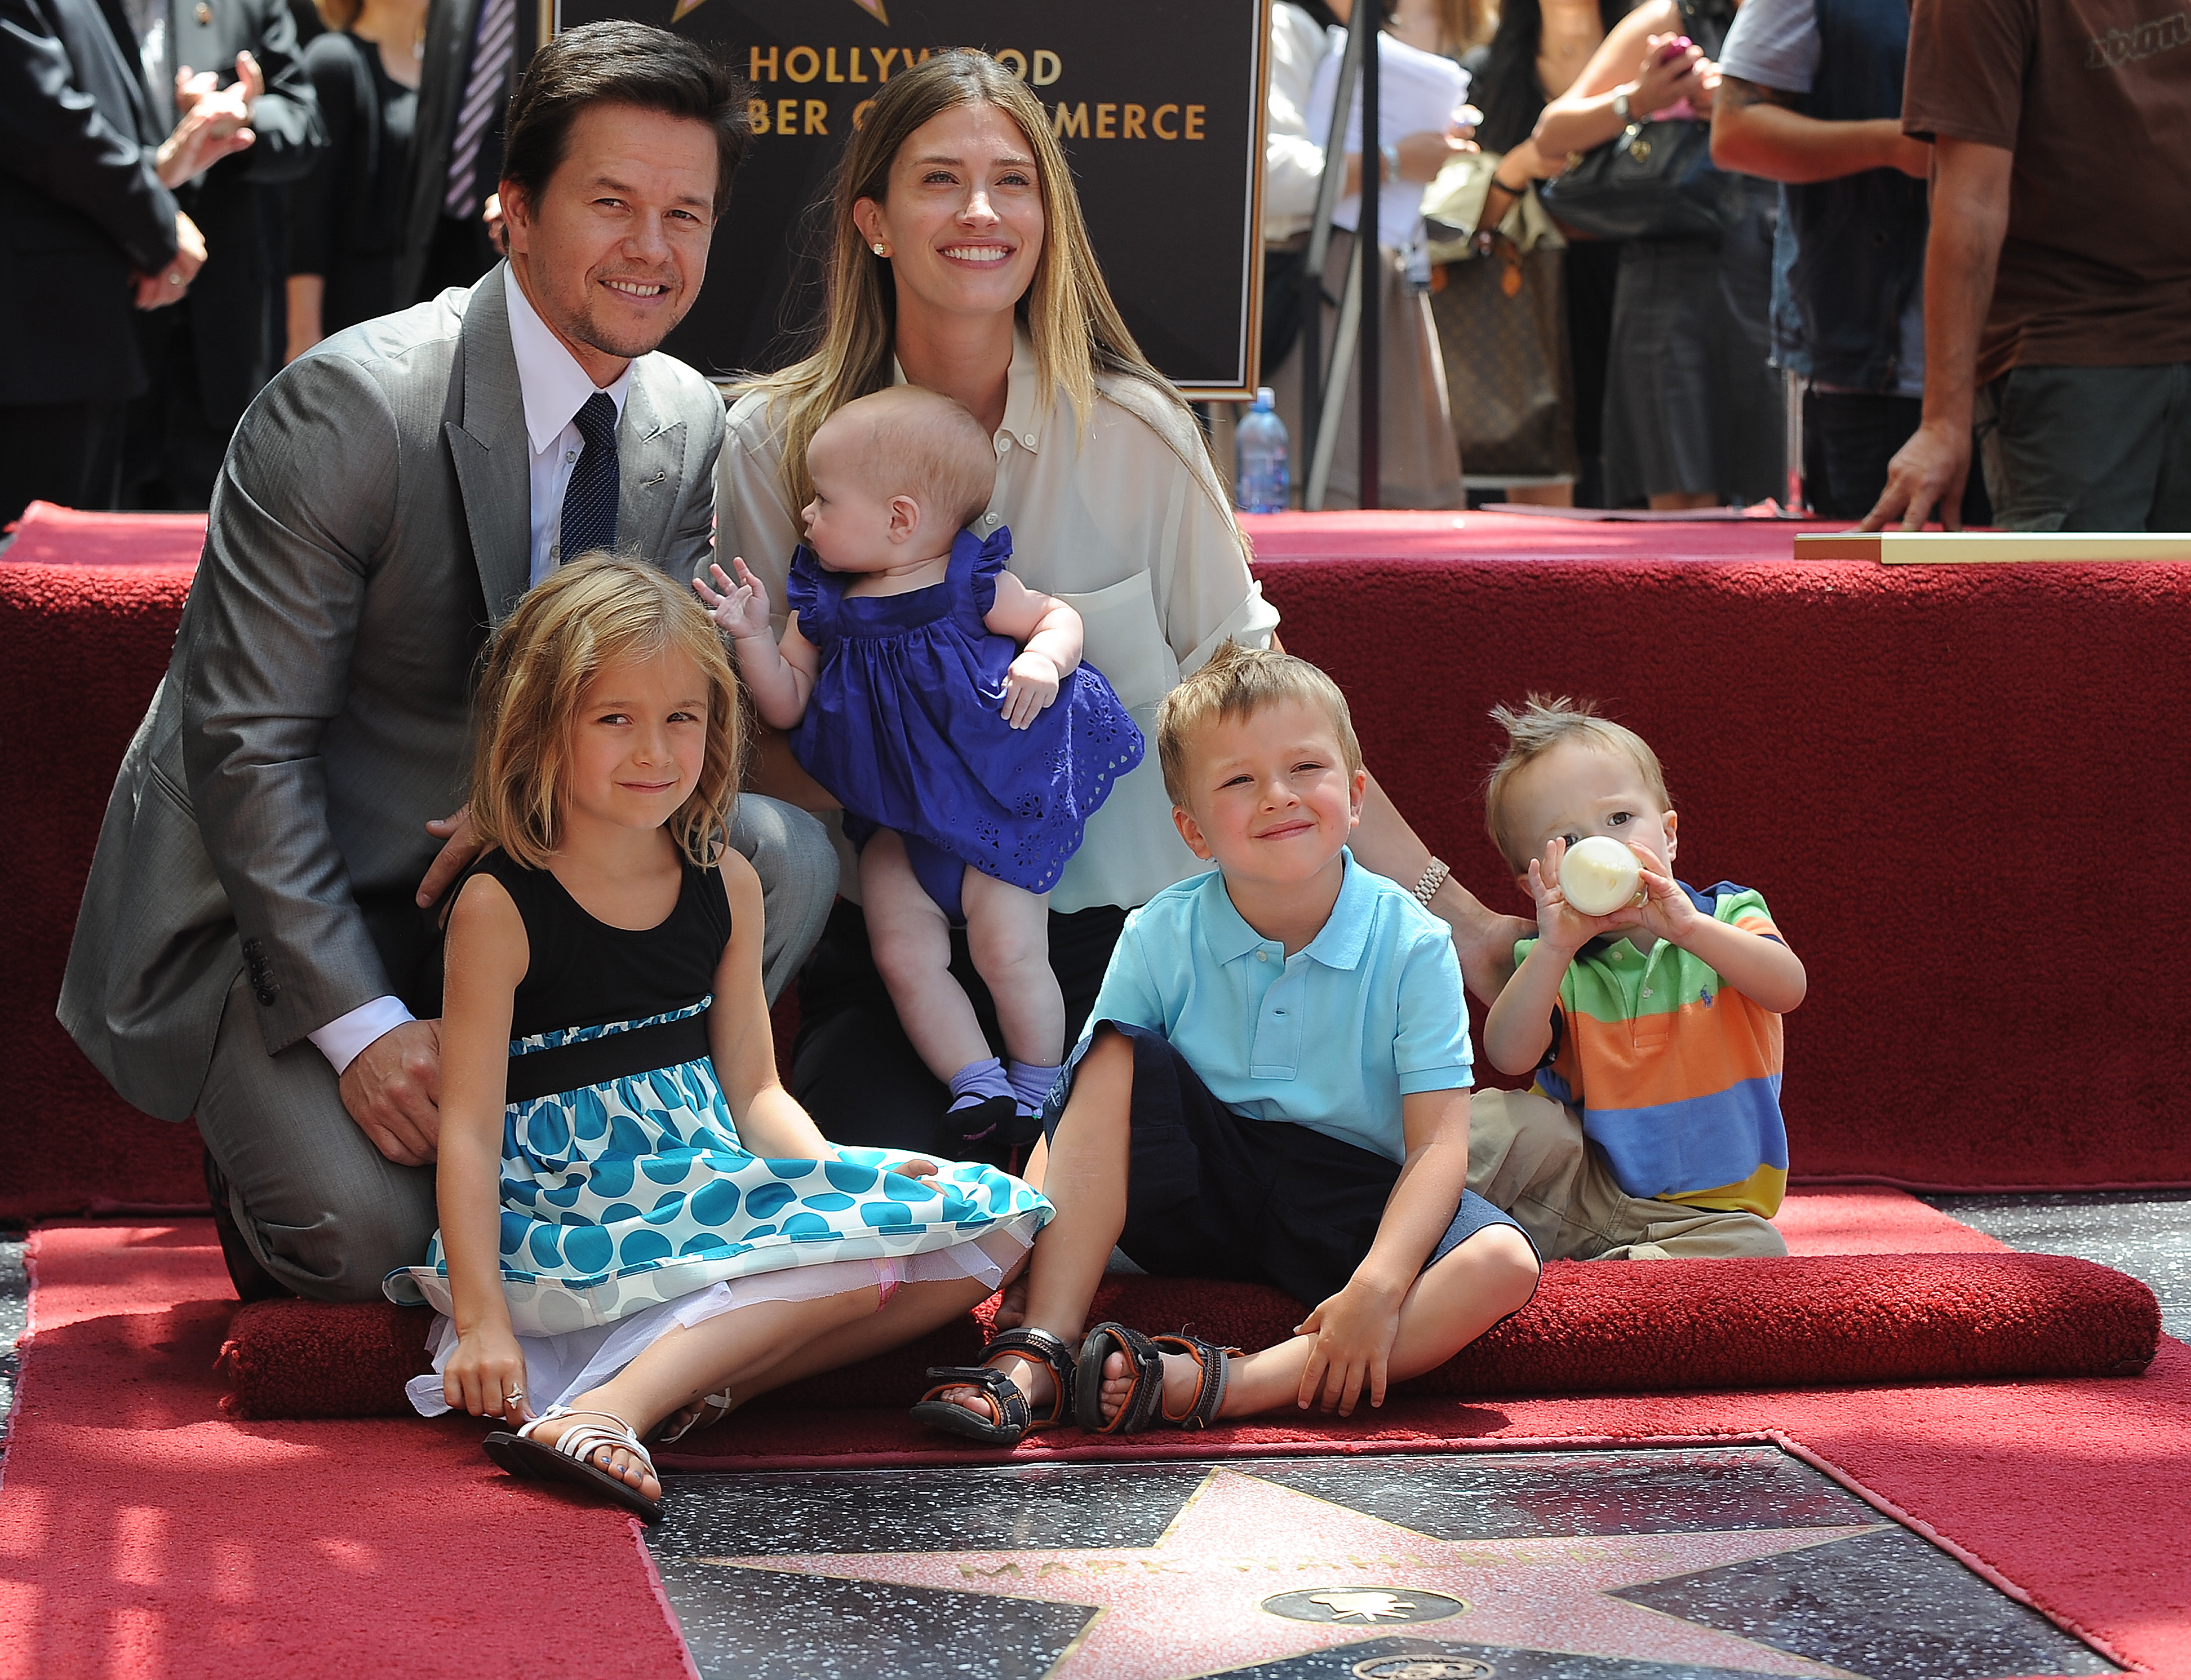 Mark Wahlberg with wife Rhea Durham and children Ella, Grace, Michael and Brendan in Los Angeles on July 29, 2010 | Source: Getty Images